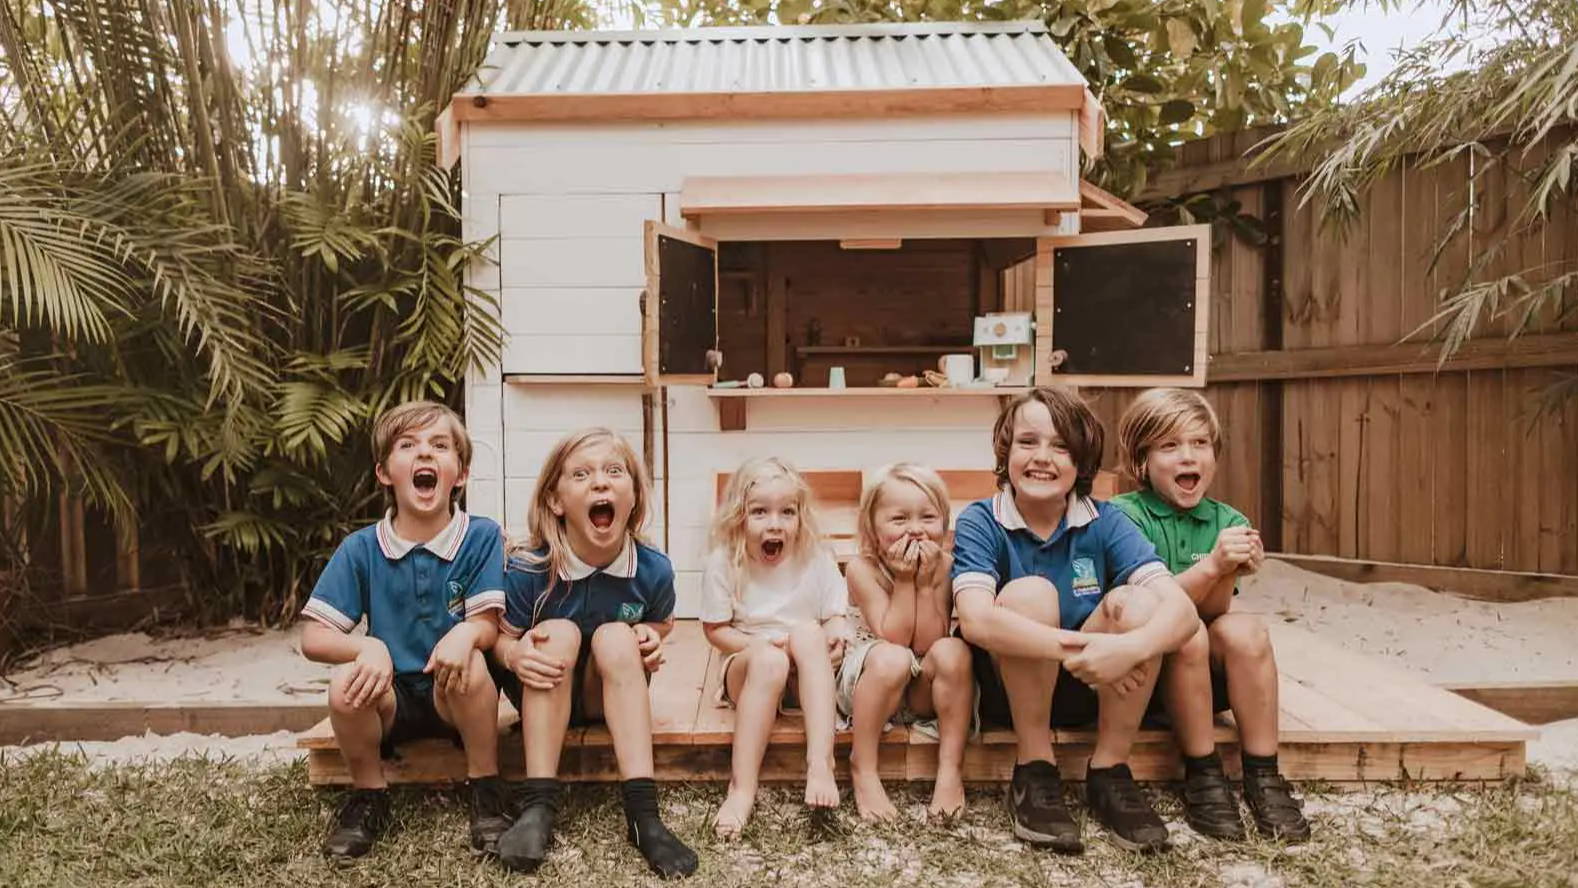 Children are smiling while sitting in front of a cubby house